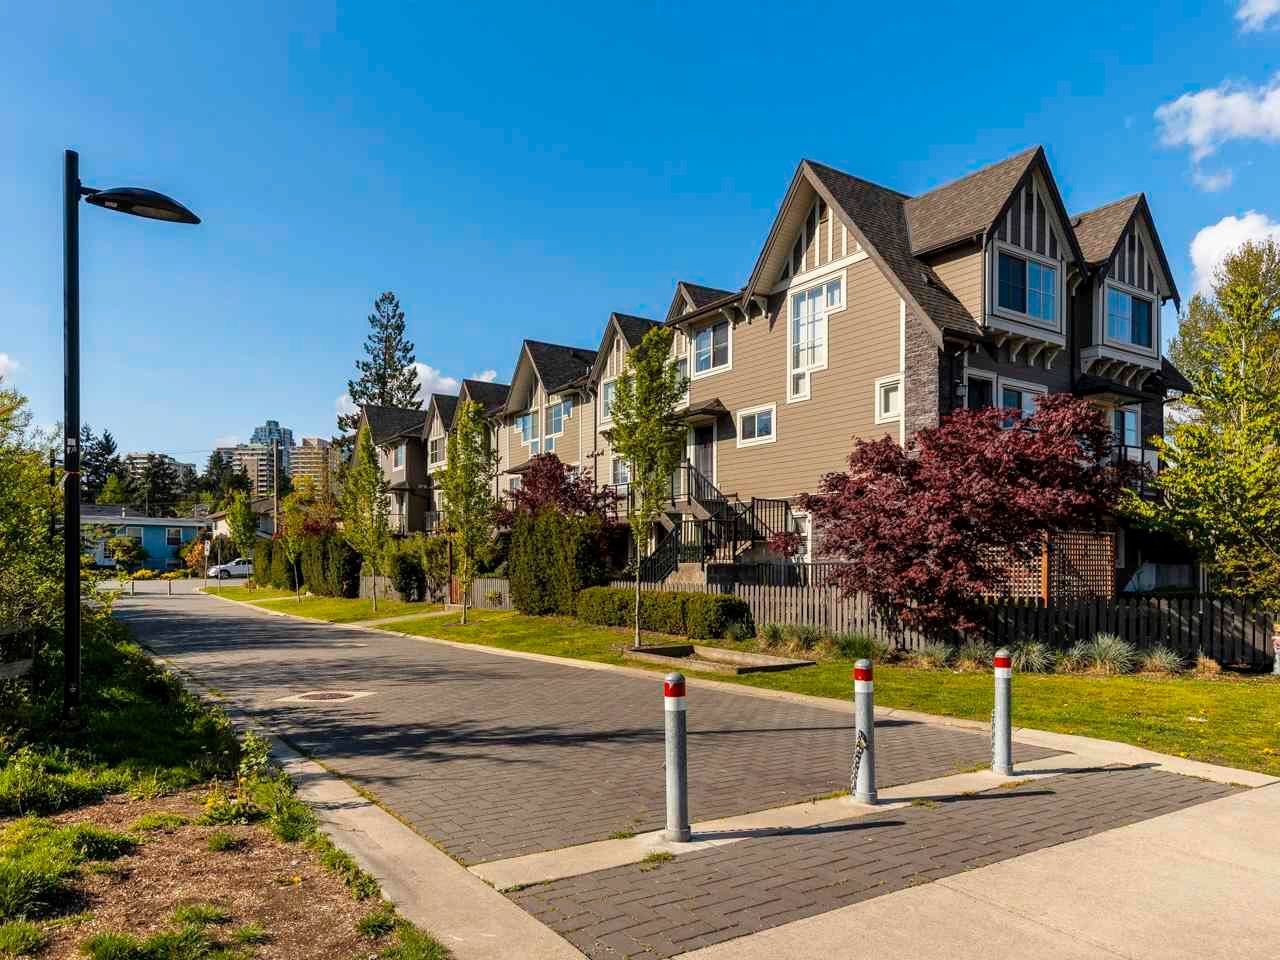 New property listed in Edmonds BE, Burnaby East